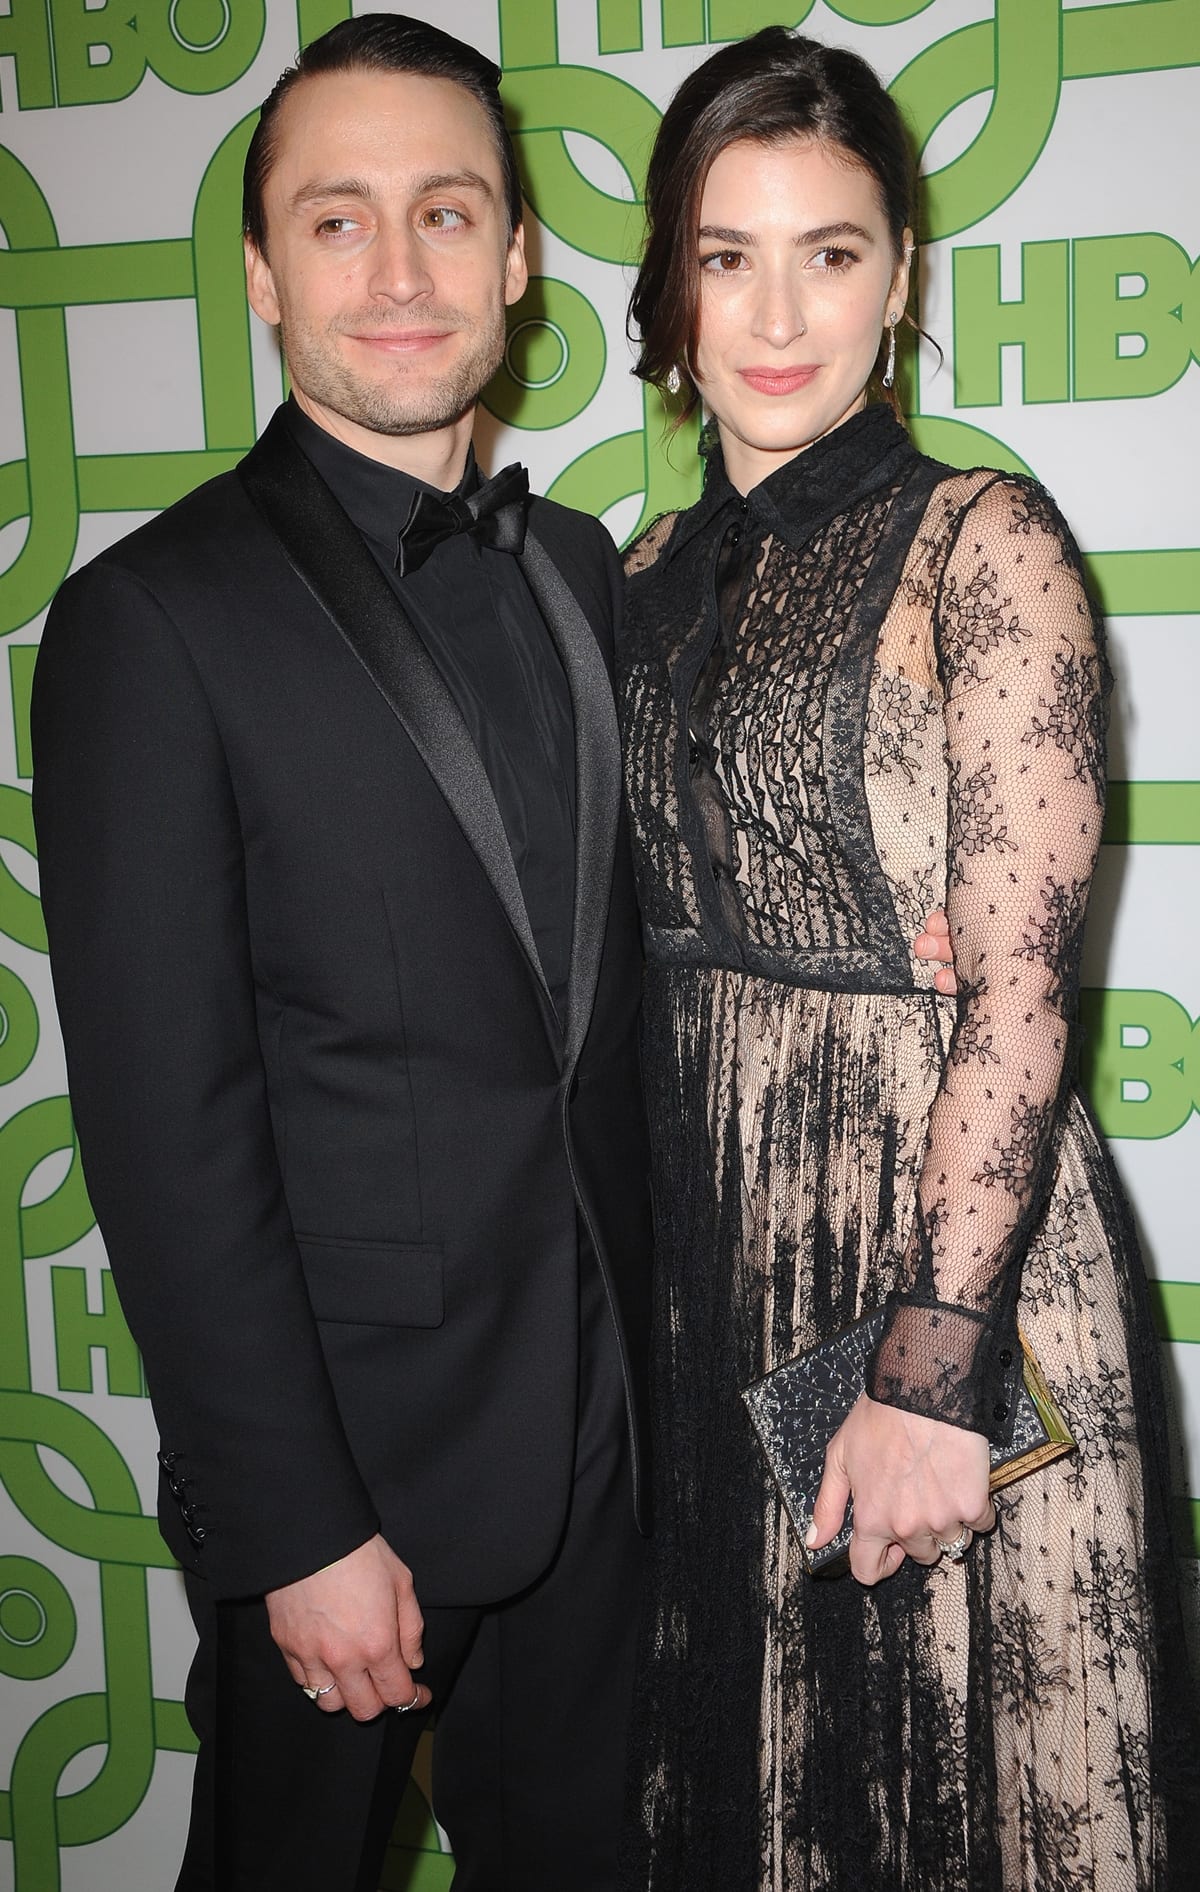 Kieran Culkin and Jazz Charton met at a bar in 2012 and married in 2013